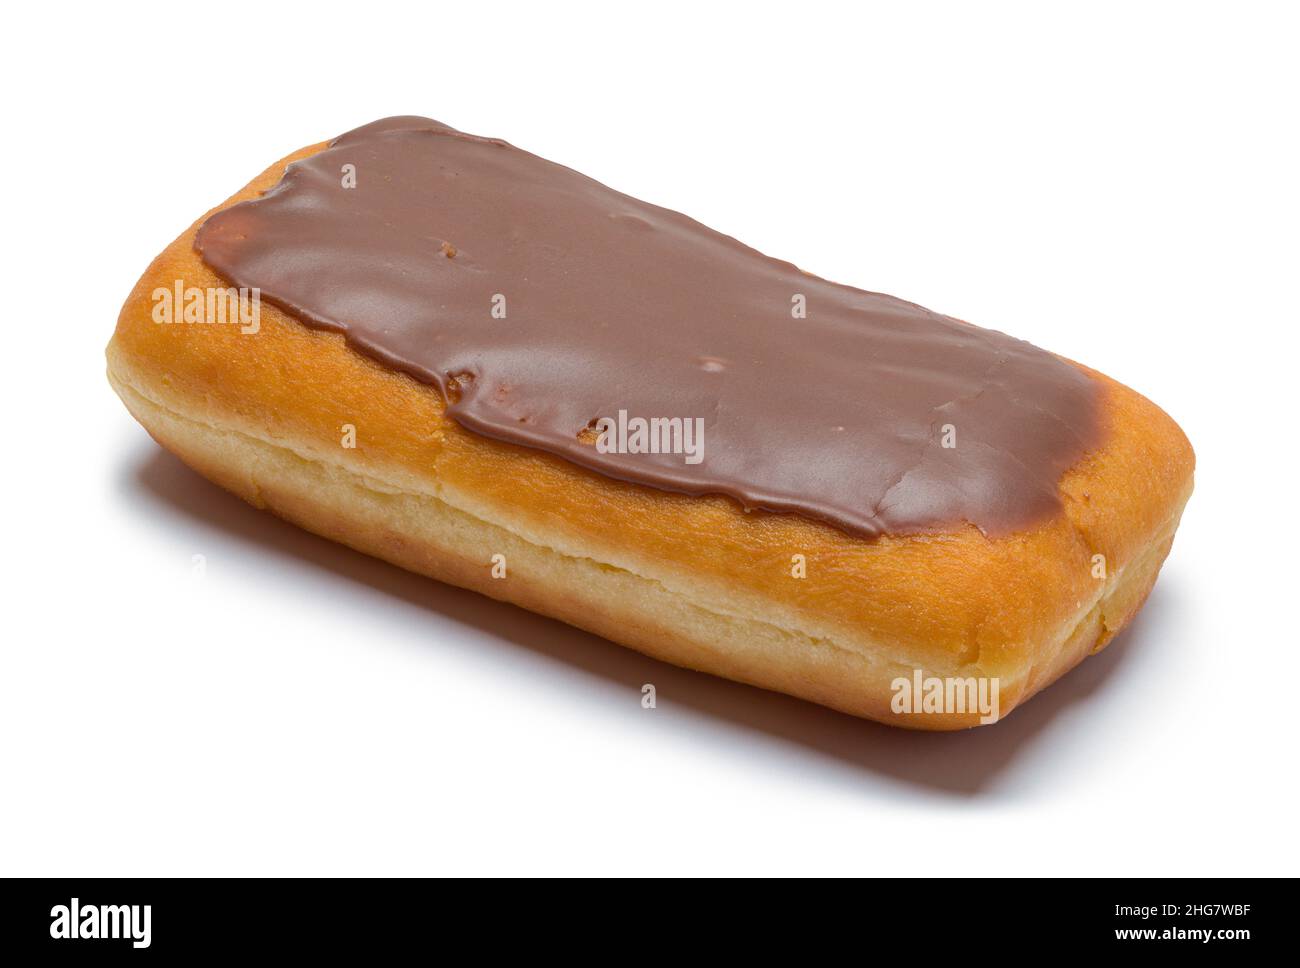 Single Chocolate Bar Donut Cut Out on White. Stockfoto